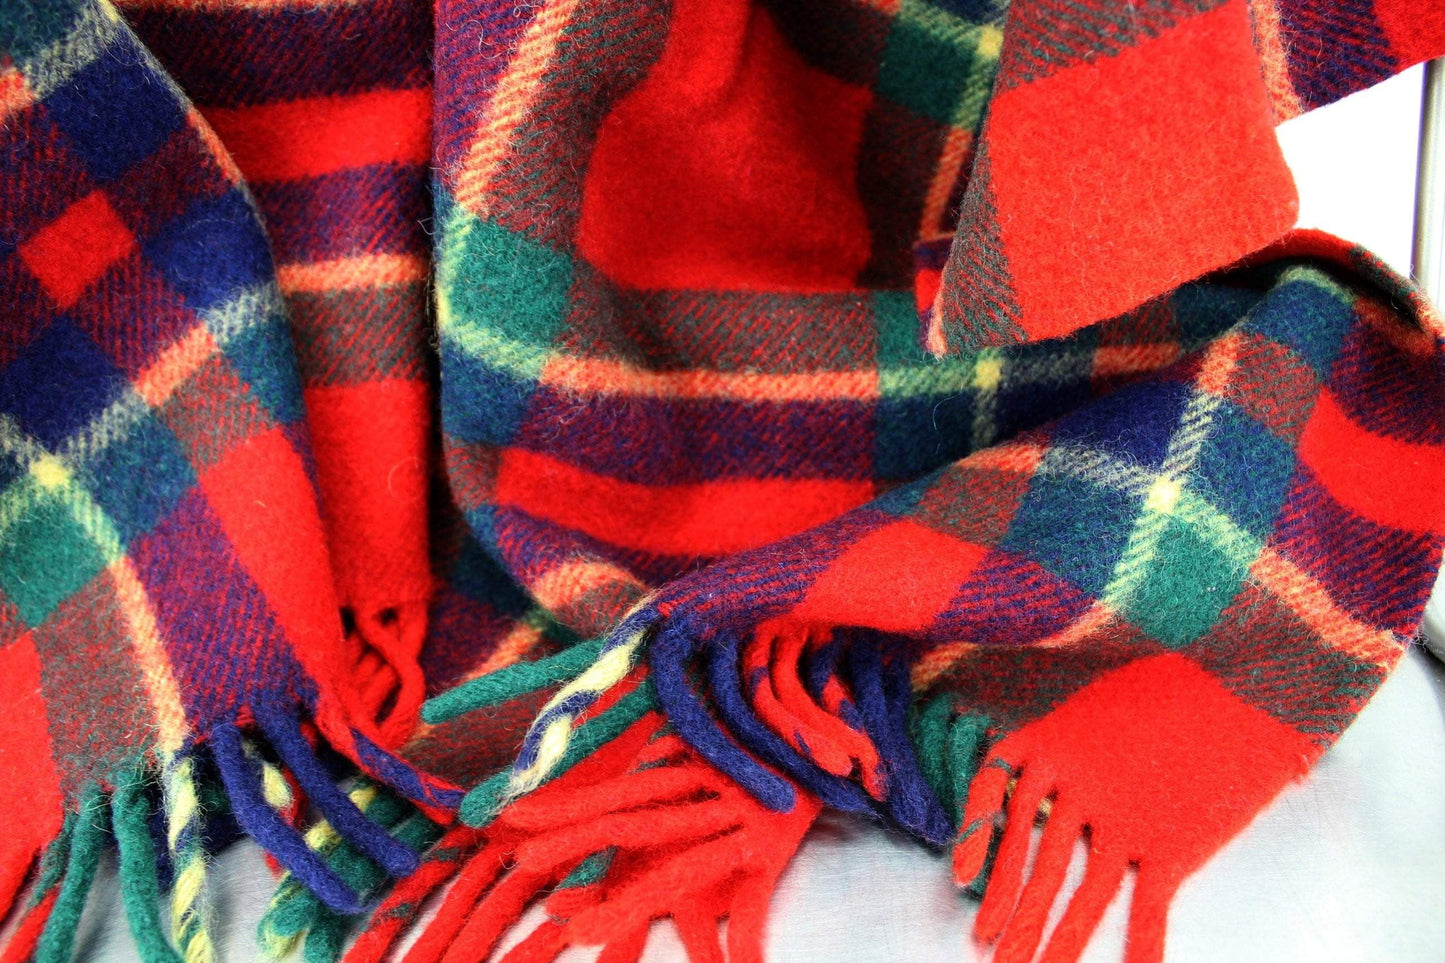 Troy Robe USA Wool Throw - Leisure Blanket Red Plaid Green Blue vibrant colors good condition